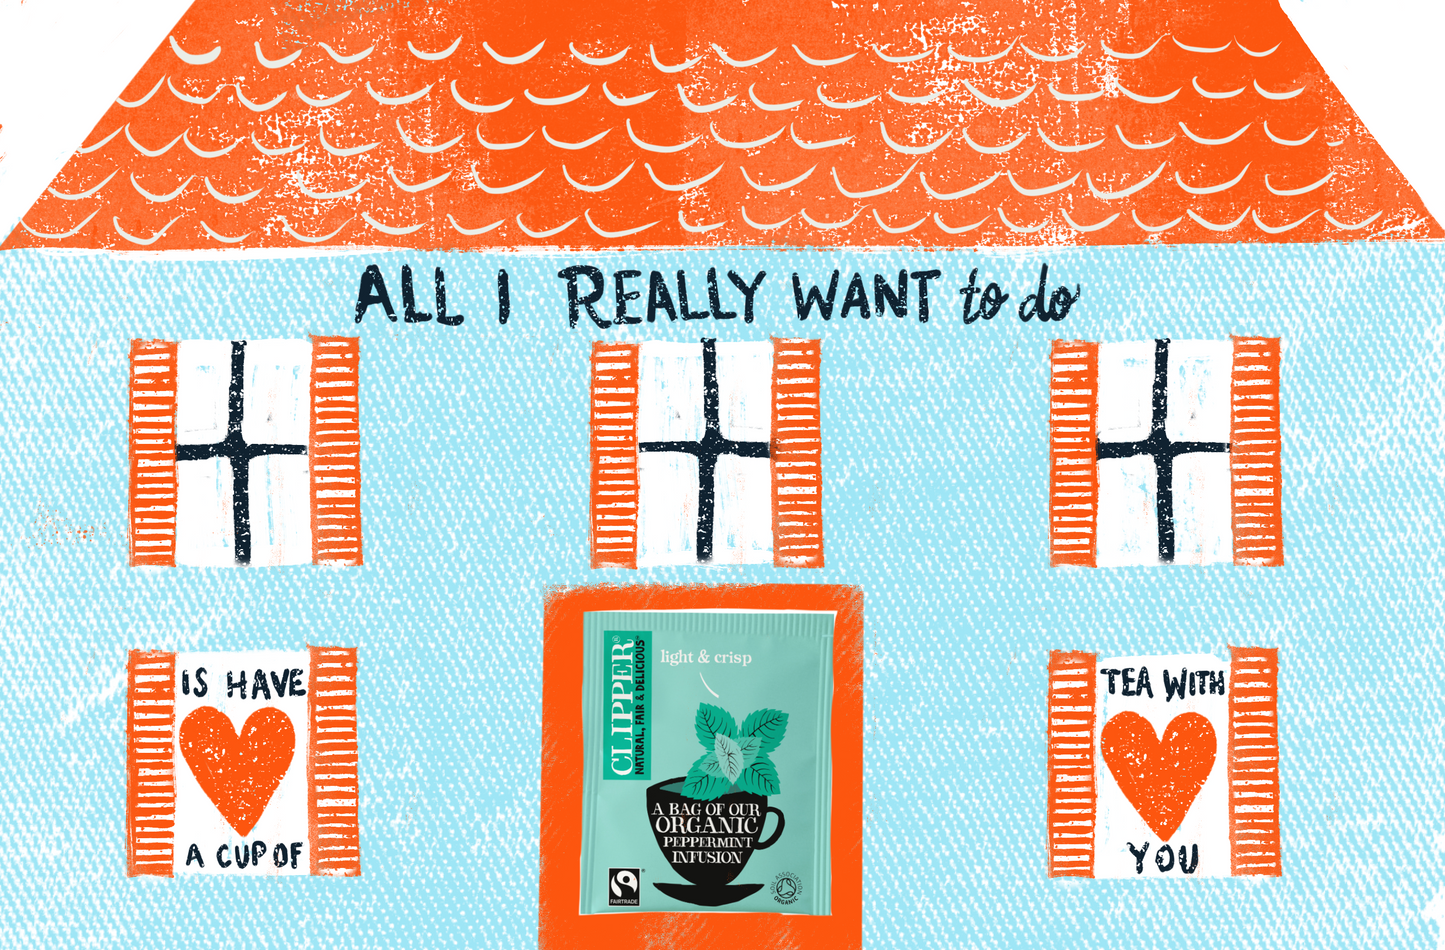 All I Really Want To Do - Card for Tea (SET of 5)